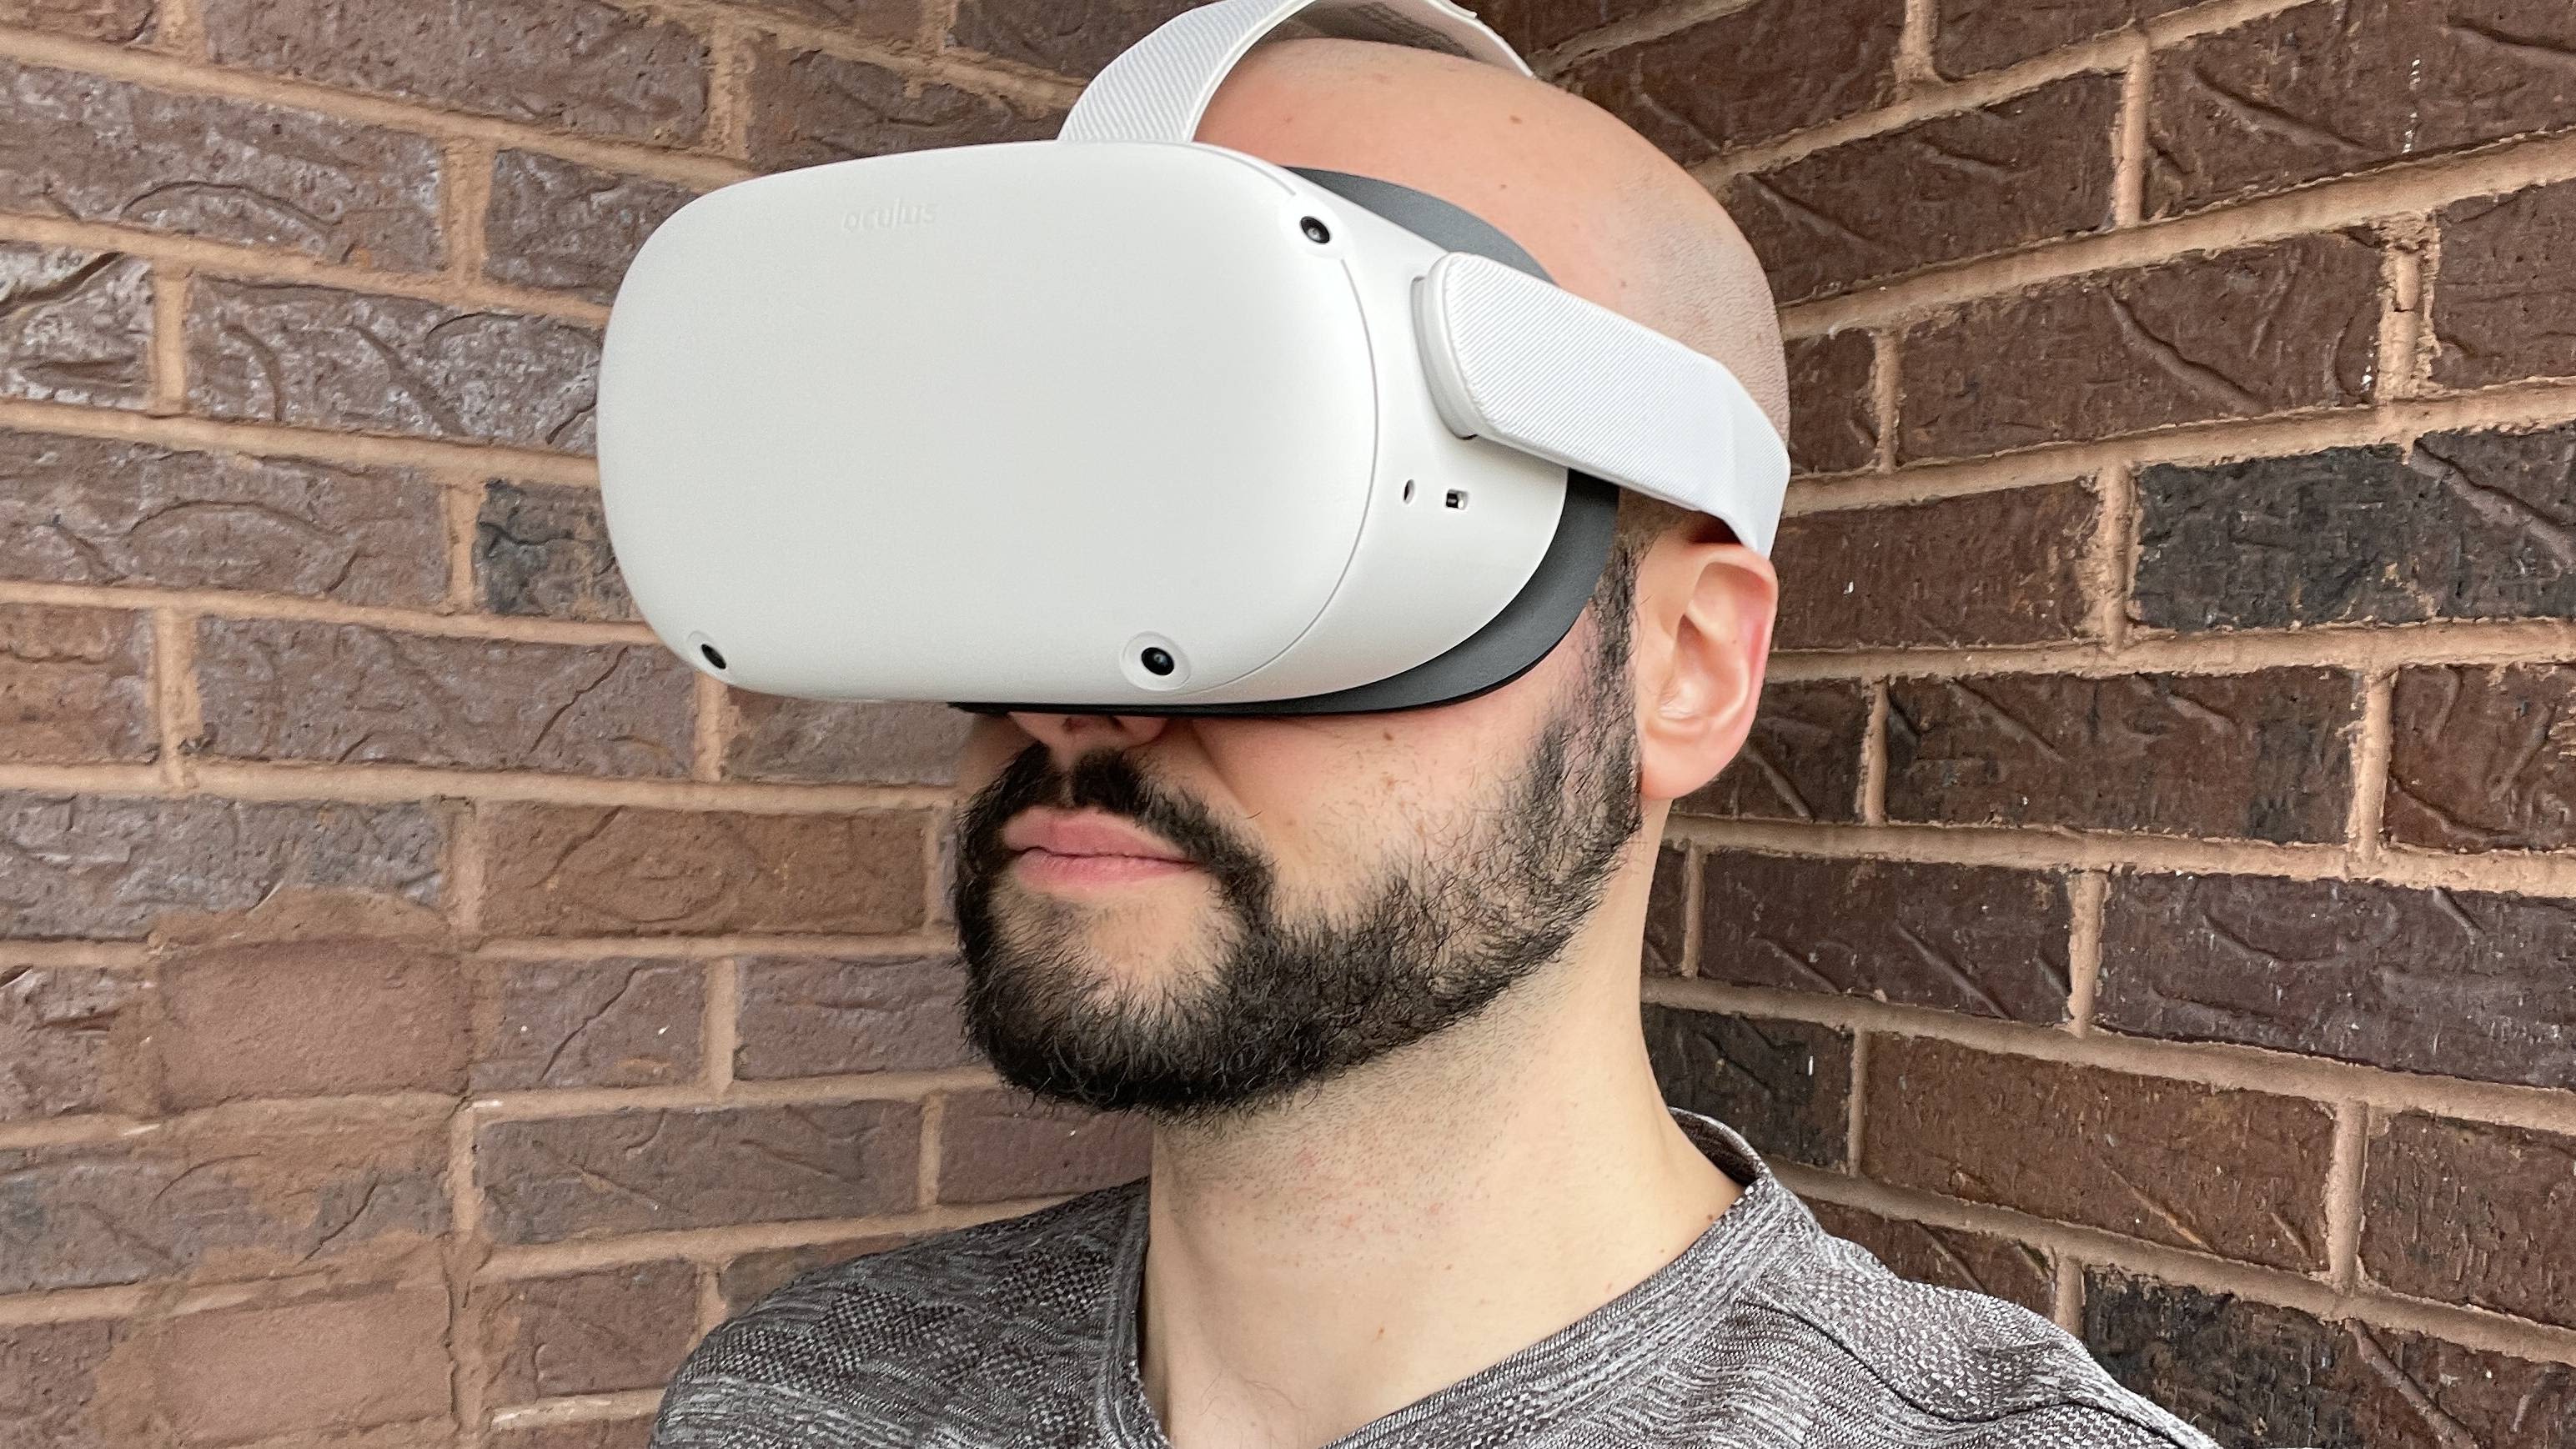 Top games with Oculus Go support 